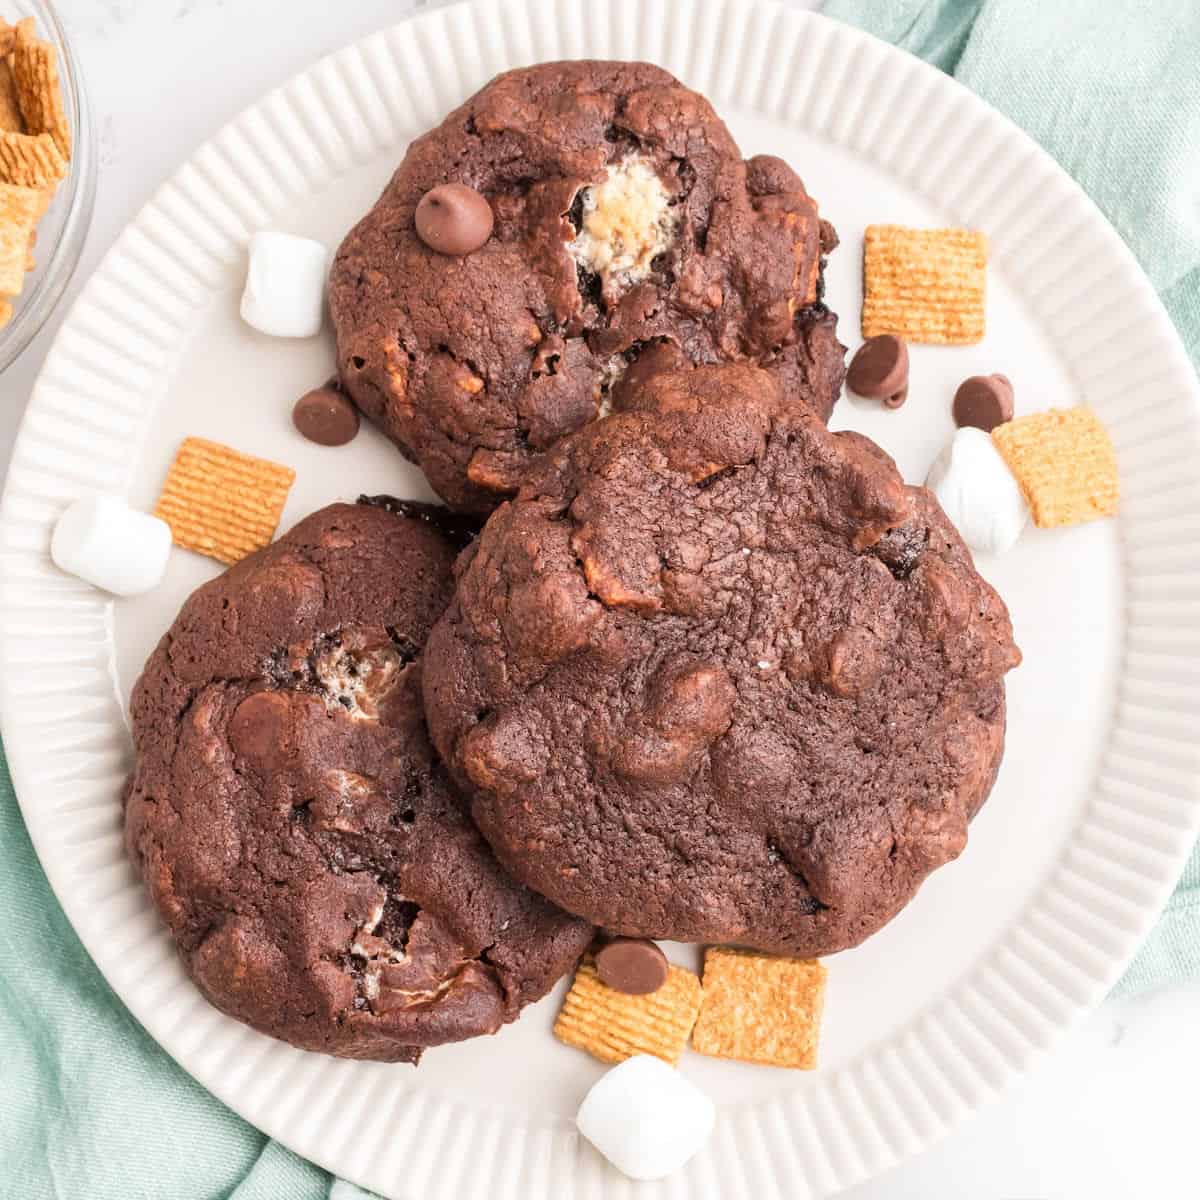 square image Make these chewy, chocolatey homemade S’mores Cookies and let the taste carry you back to the childhood joy of roasting marshmallows! #Realhousemoms #smores #smorescookies #cookies #chocolate #chewy #homemade #kidpproved #marshmellows #cookiemonster #christmascookies #christmastreats